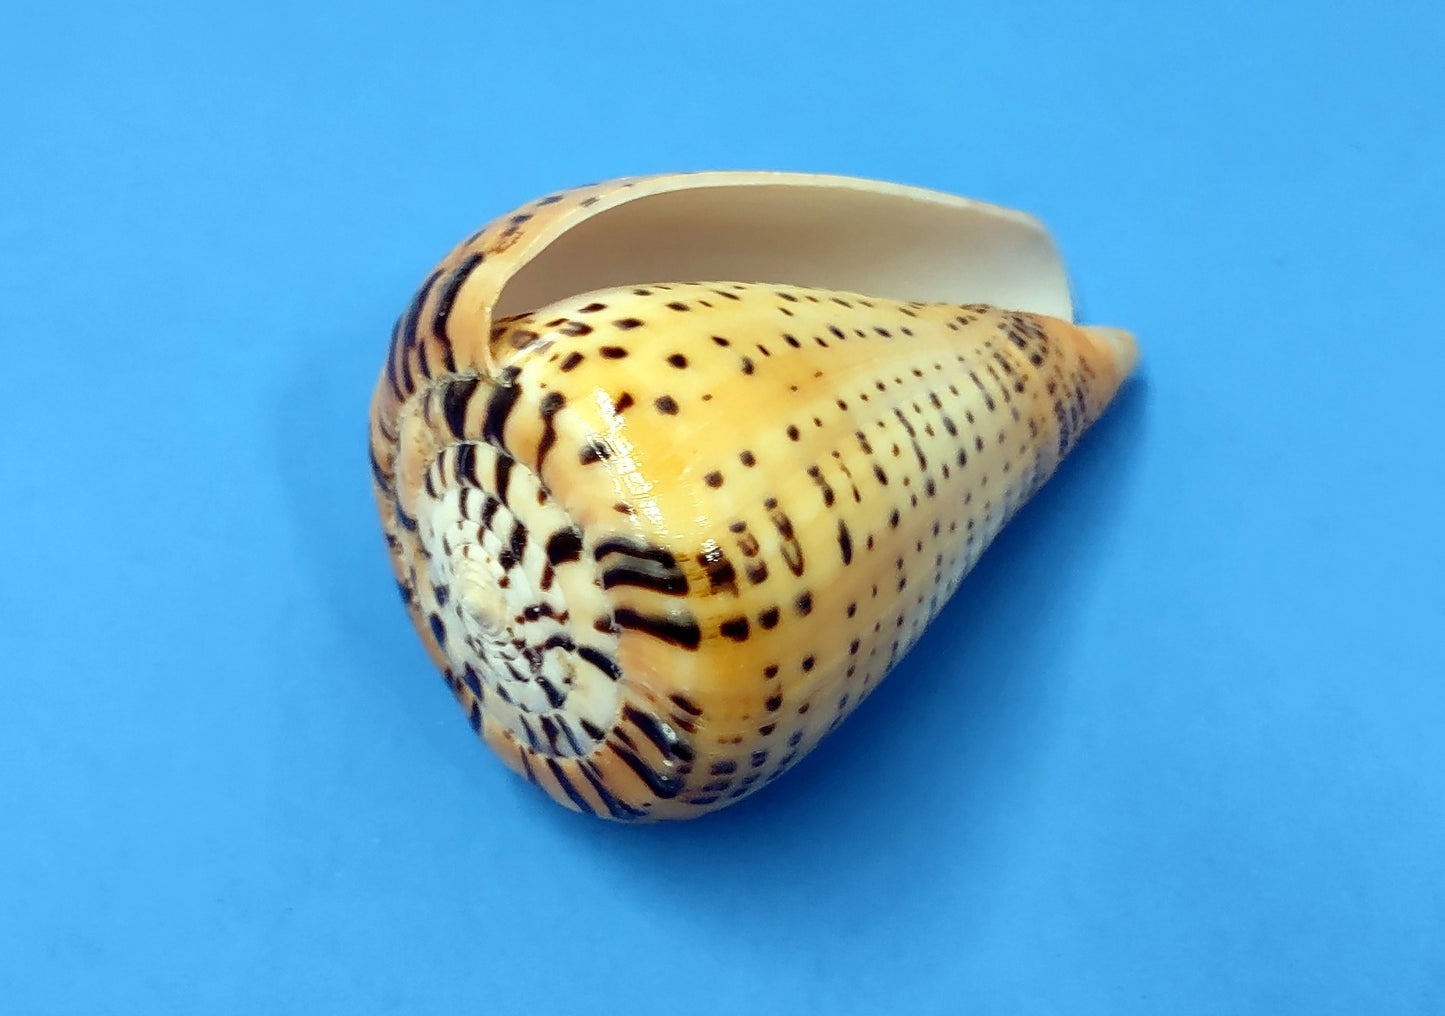 Beech Cone Polished Seashell - Conus Betulinus - (1 shell approx. 3.5-4 inches). Orange and black wrapped wide spiral shell with black dotted designs around the outer side. Copyright 2022 SeaShellSupply.com.